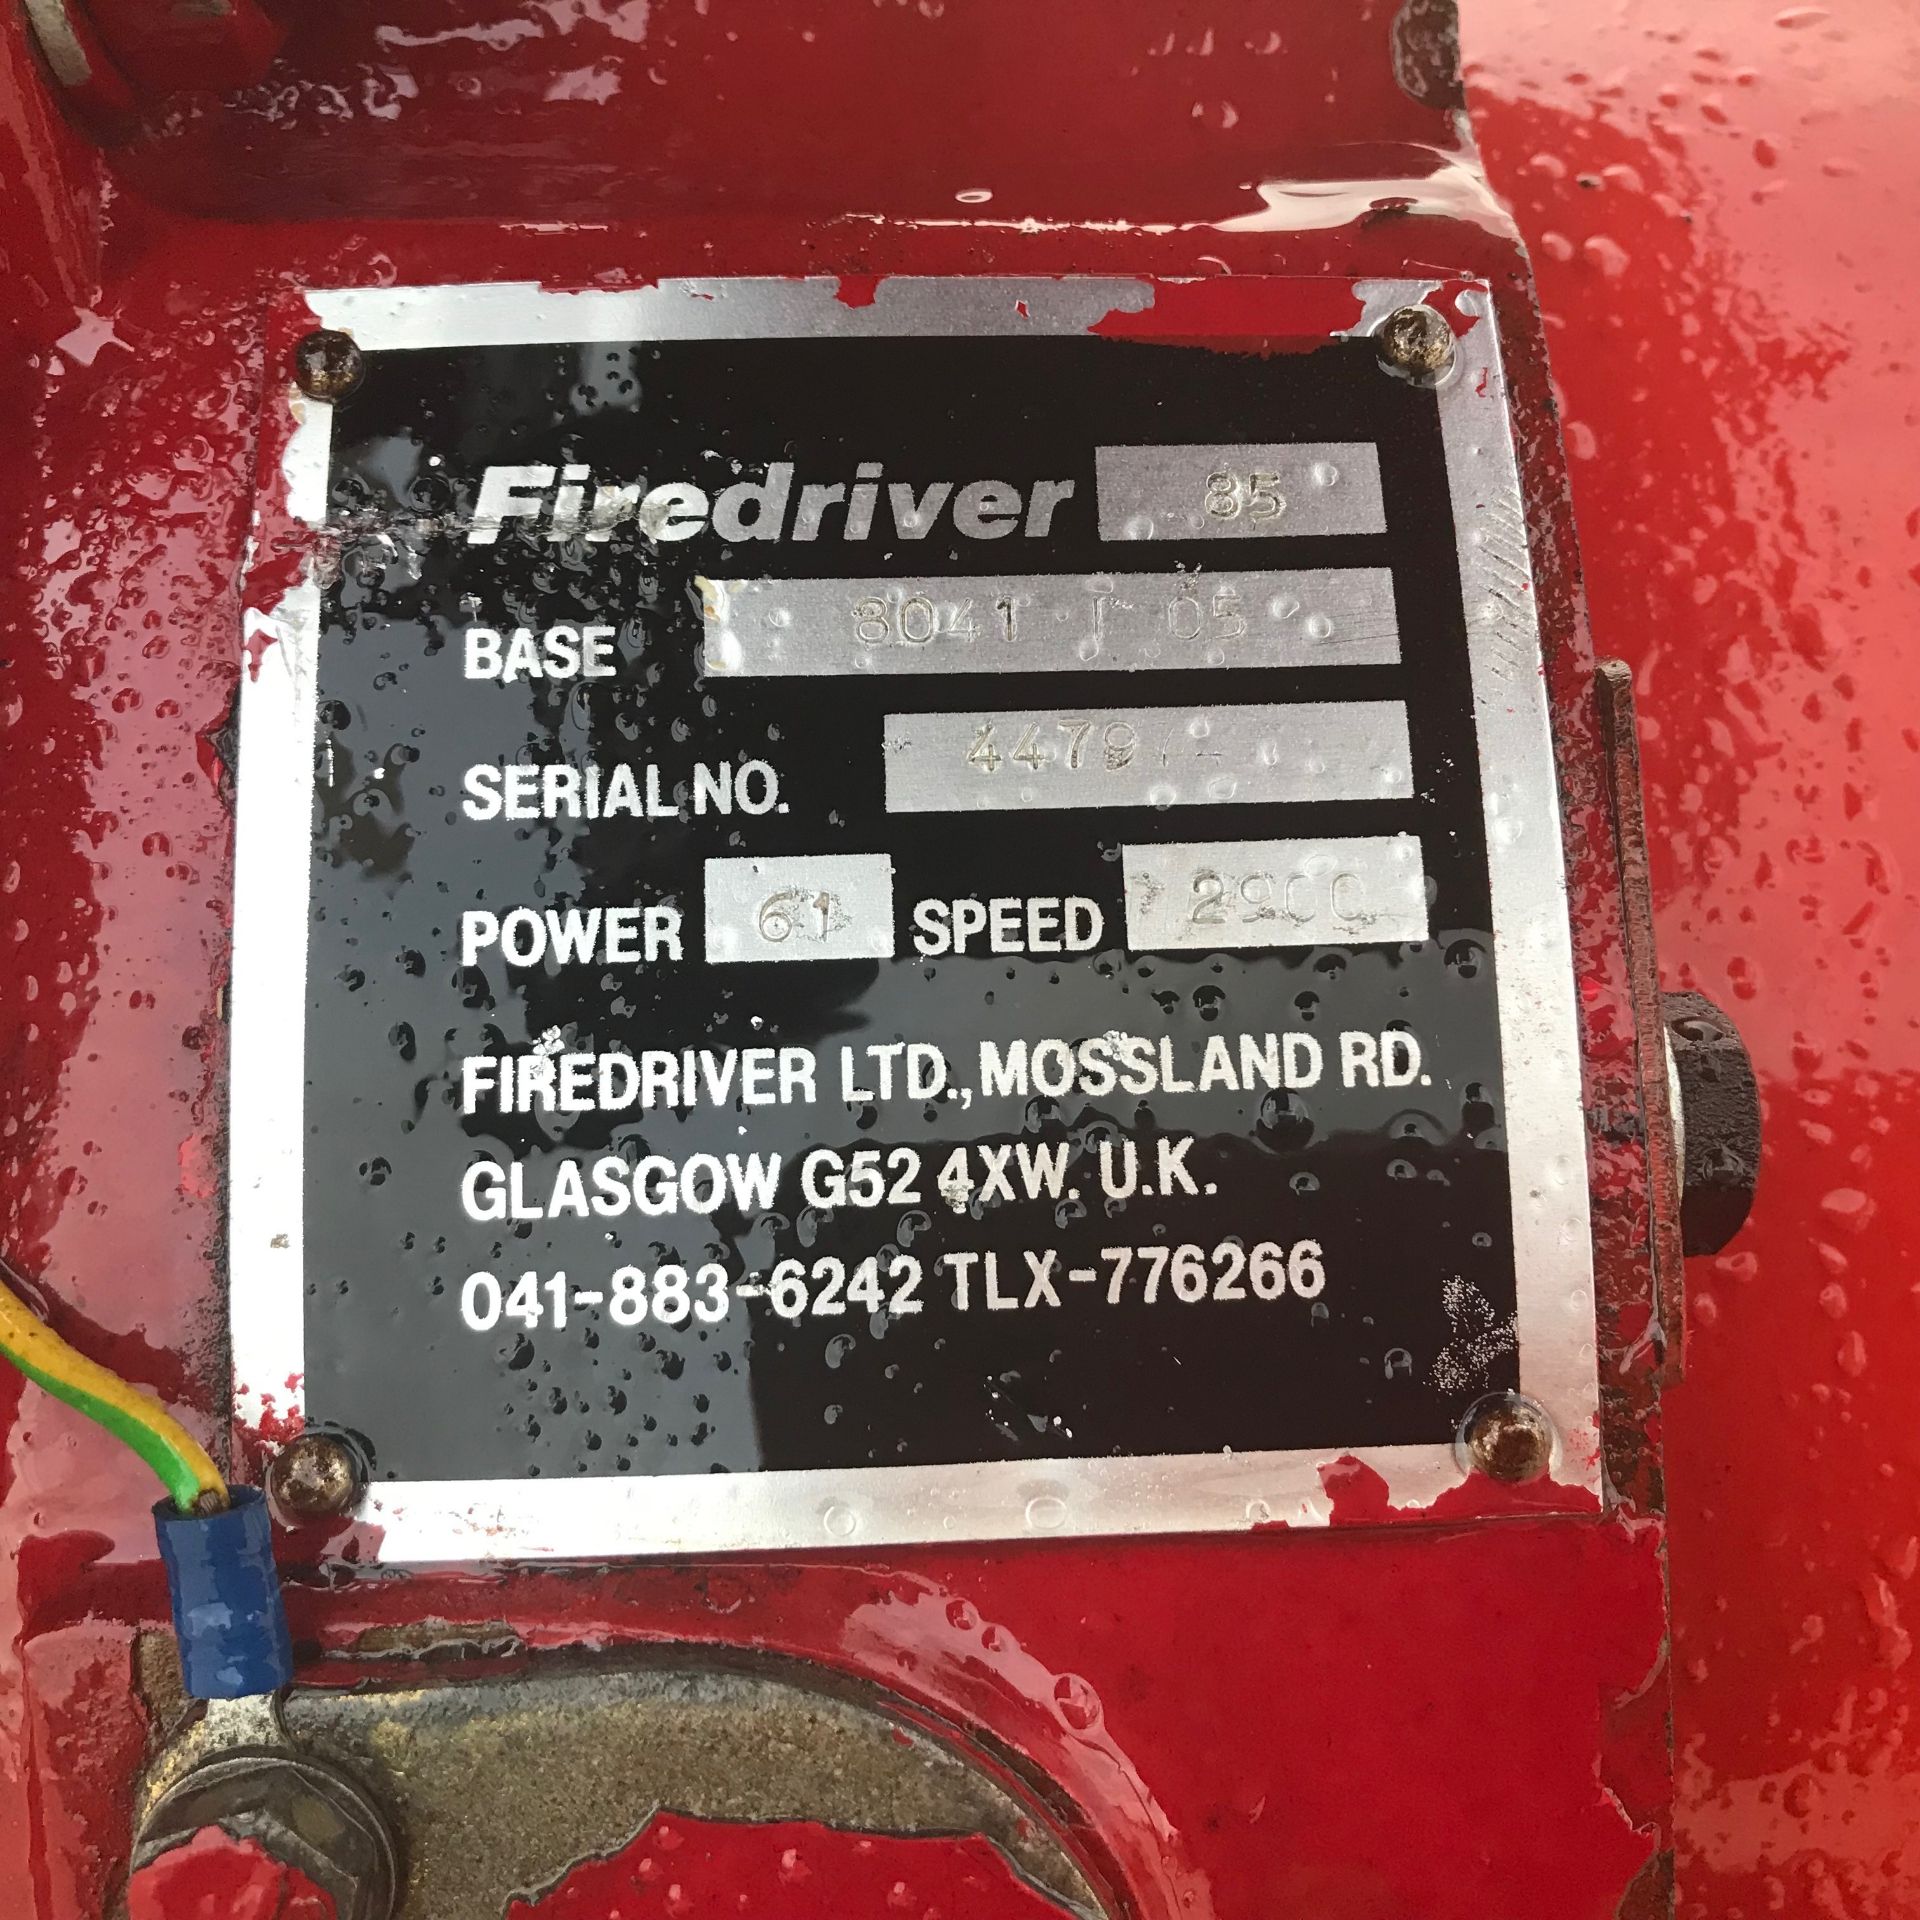 Iveco/Firedriver 85 4 cylinder Diesel Fire Pump - Image 4 of 5